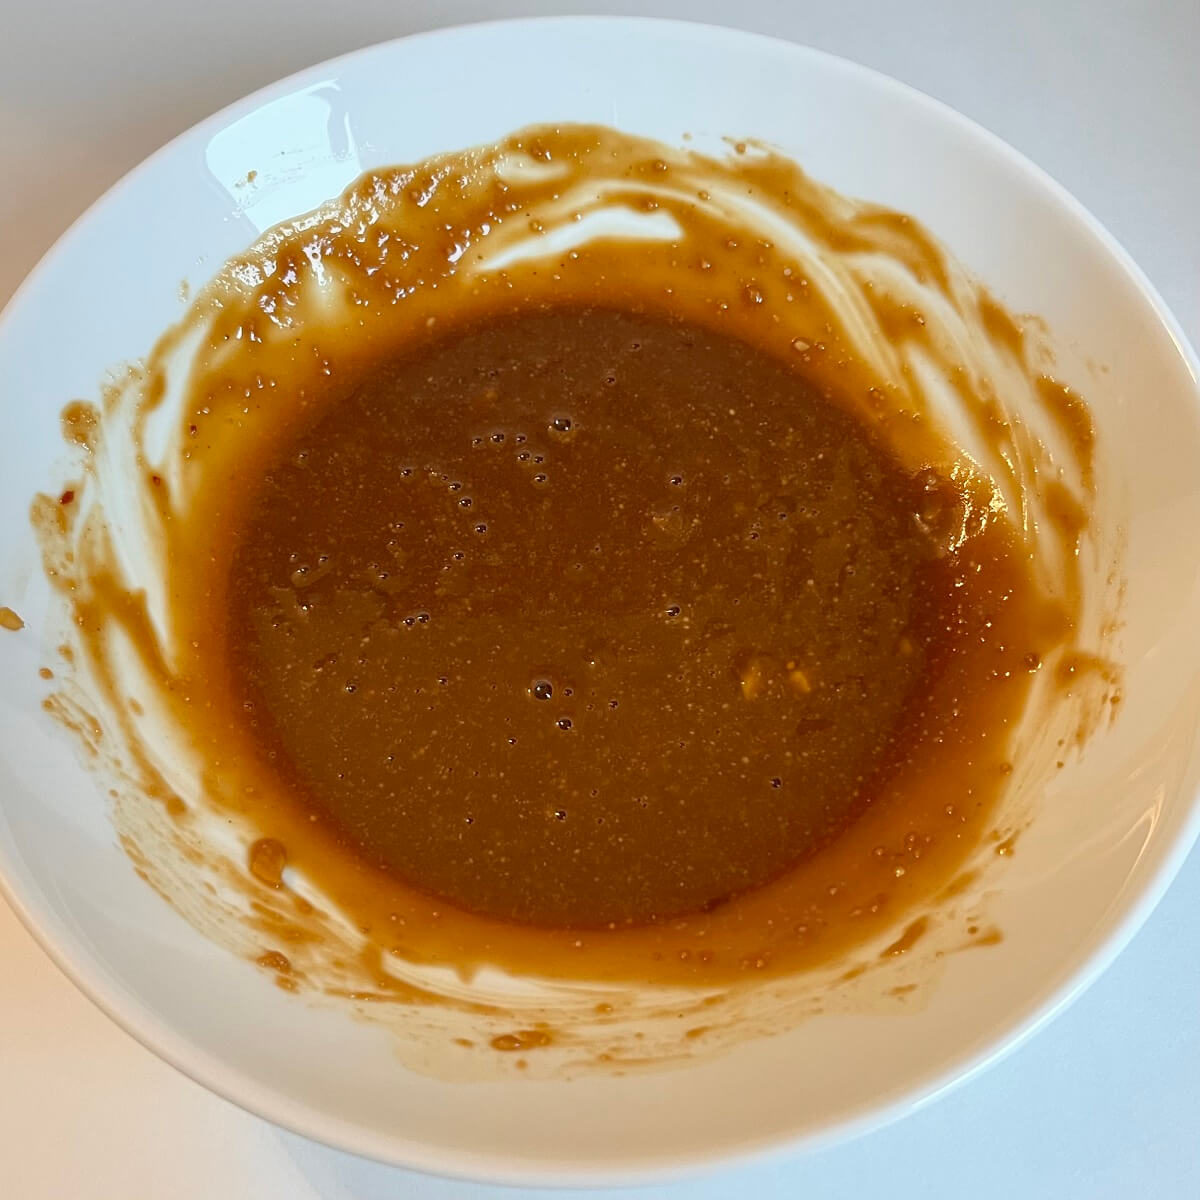 Thick brown marinade in a white bowl.